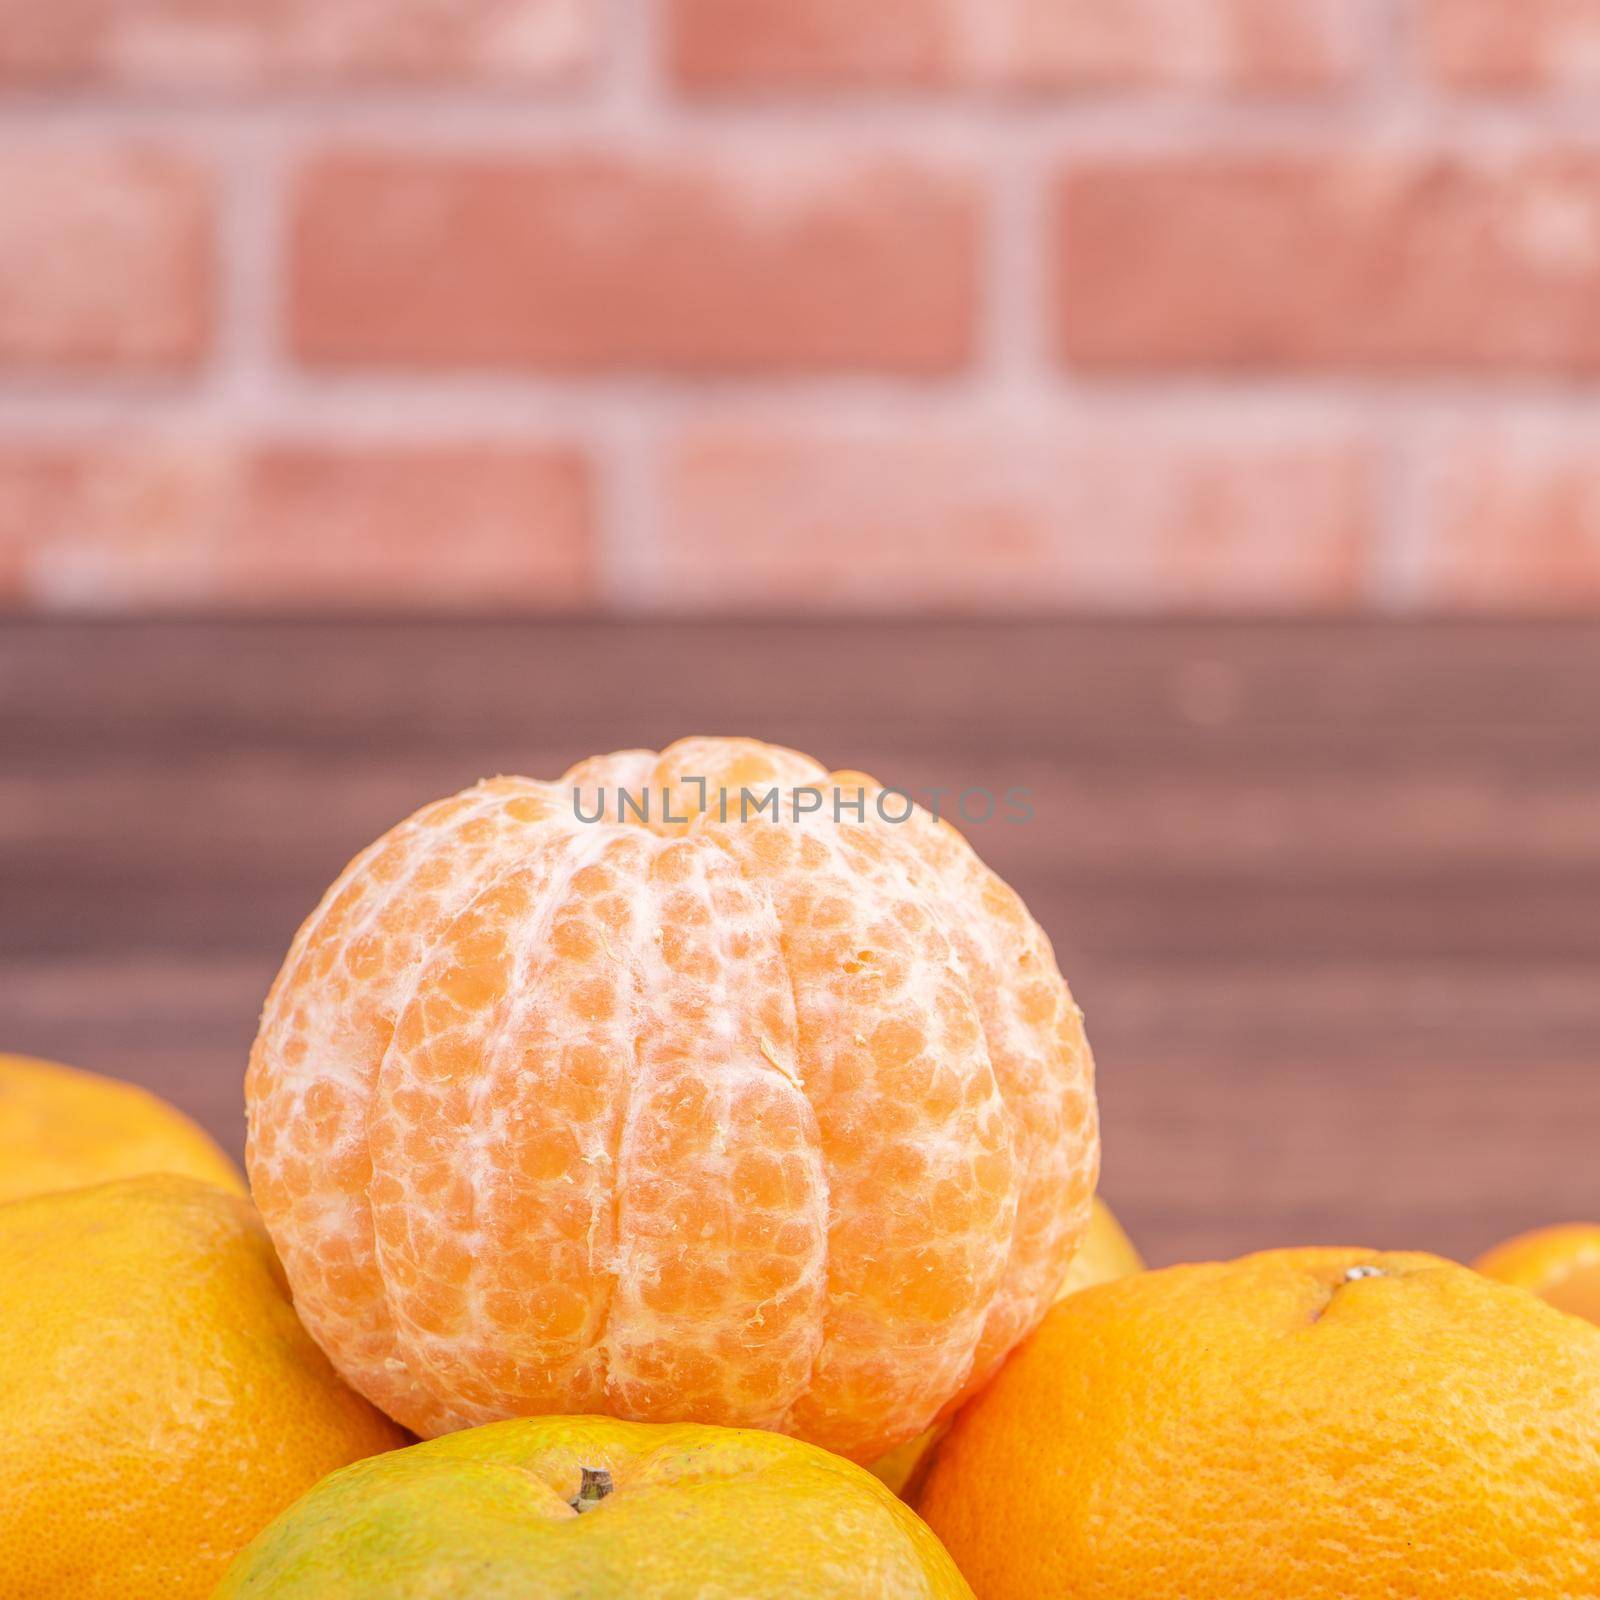 Peeled tangerines in a bamboo sieve basket on dark wooden table with red brick wall background, Chinese lunar new year fruit design concept, close up.